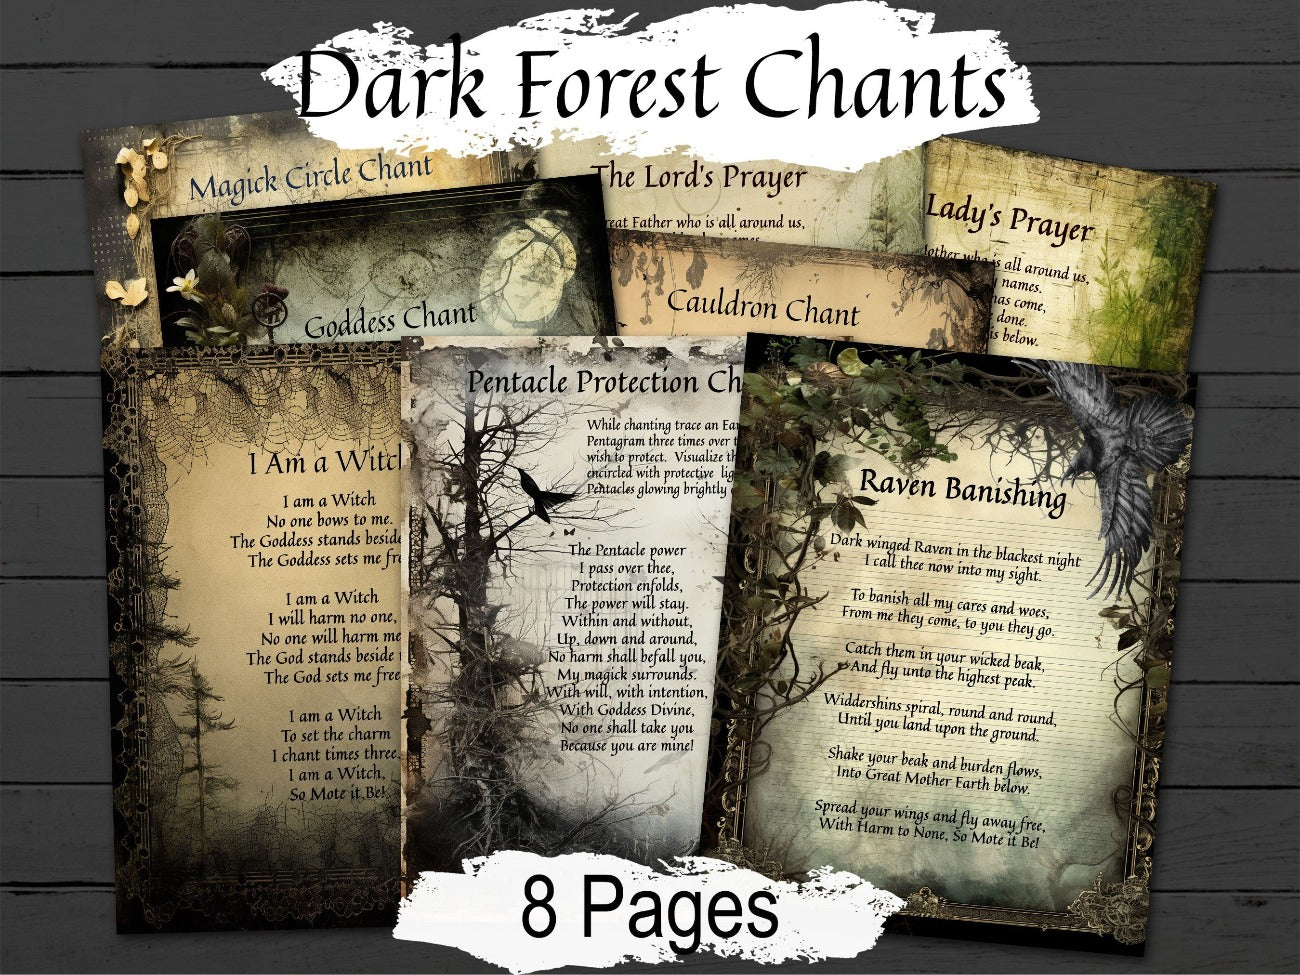 DARK FOREST CHANTS, Forest Spirit, Enchanted Woodland Papers, Printable Pagan Wicca Witch Spellbook pages, Cast a Circle, Protection Spell - Morgana Magick Spell